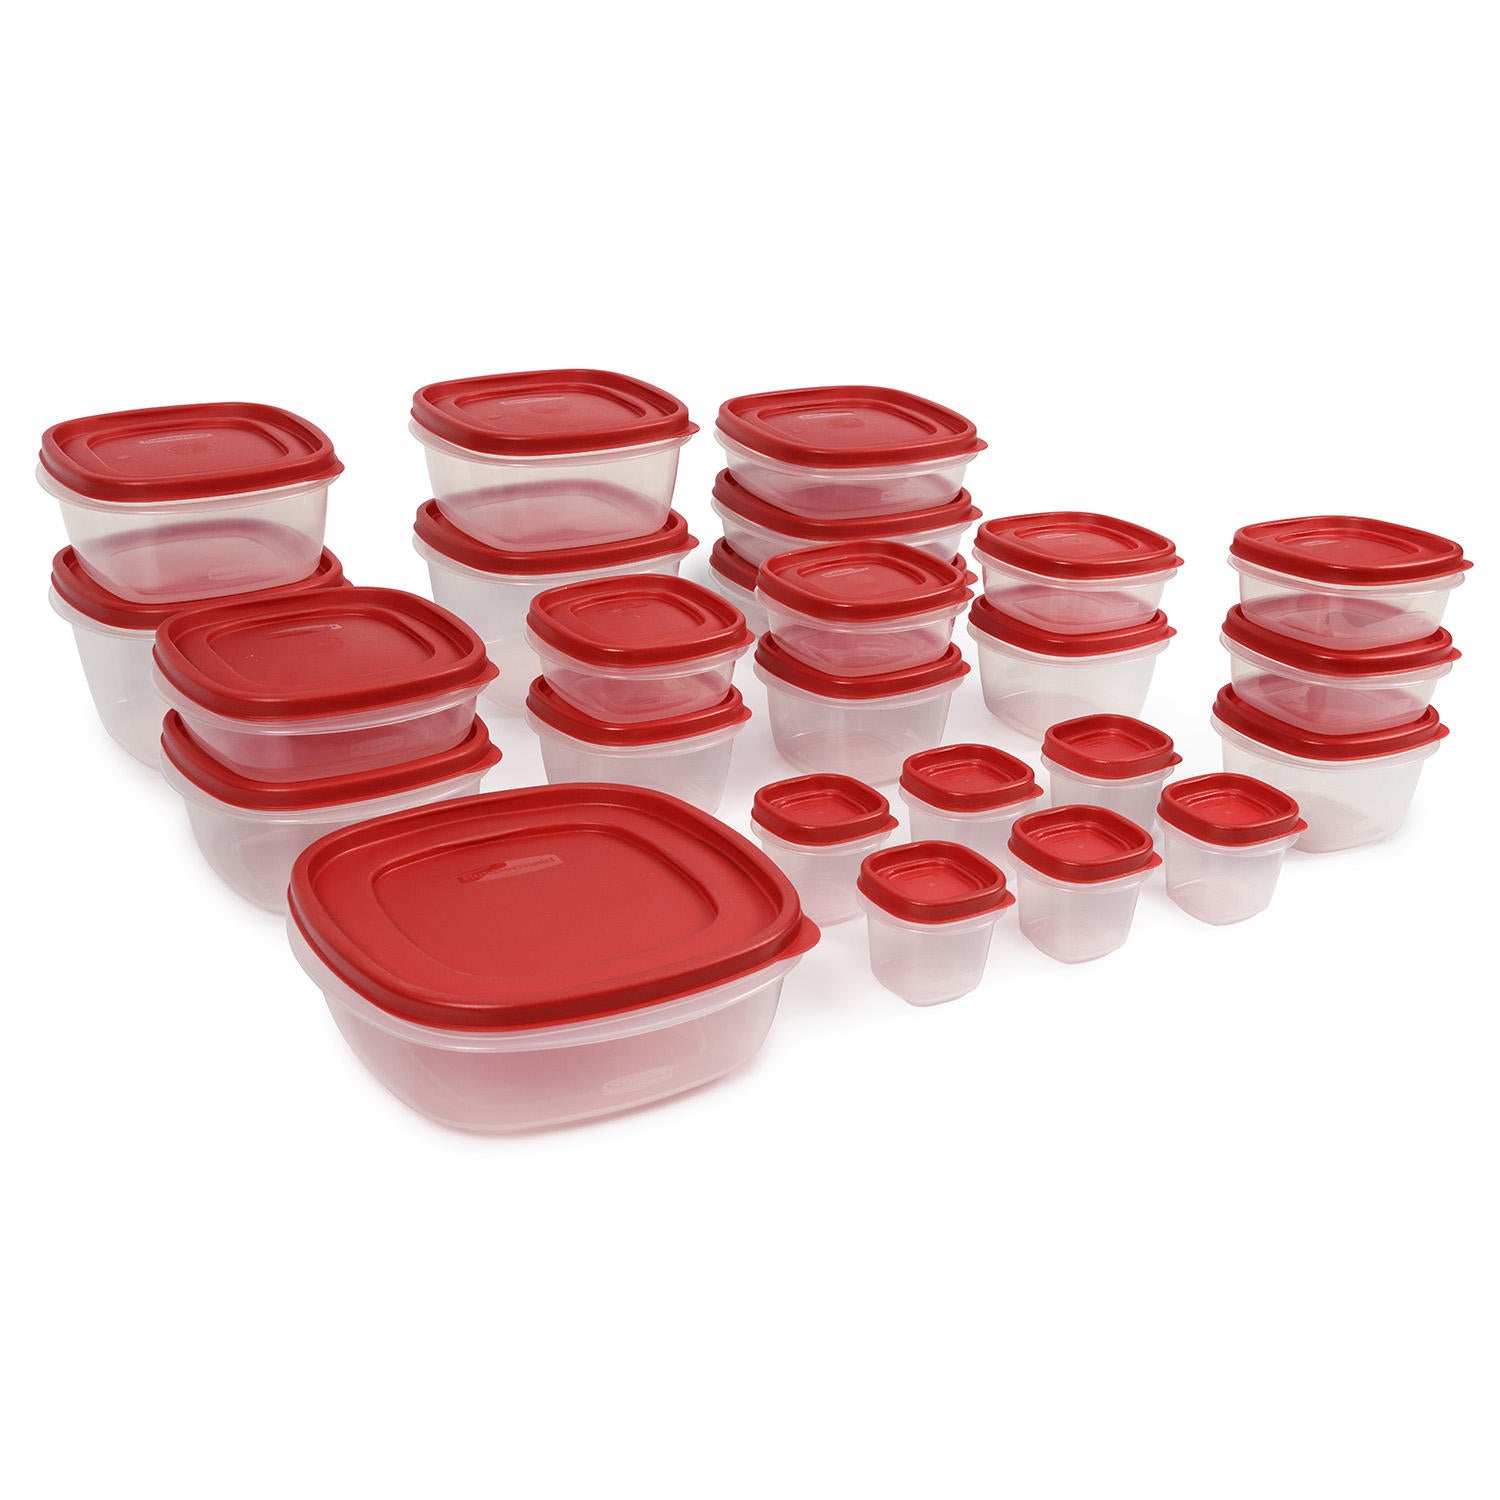 These Rubbermaid EasyFindLids Meal Prep Containers are on sale